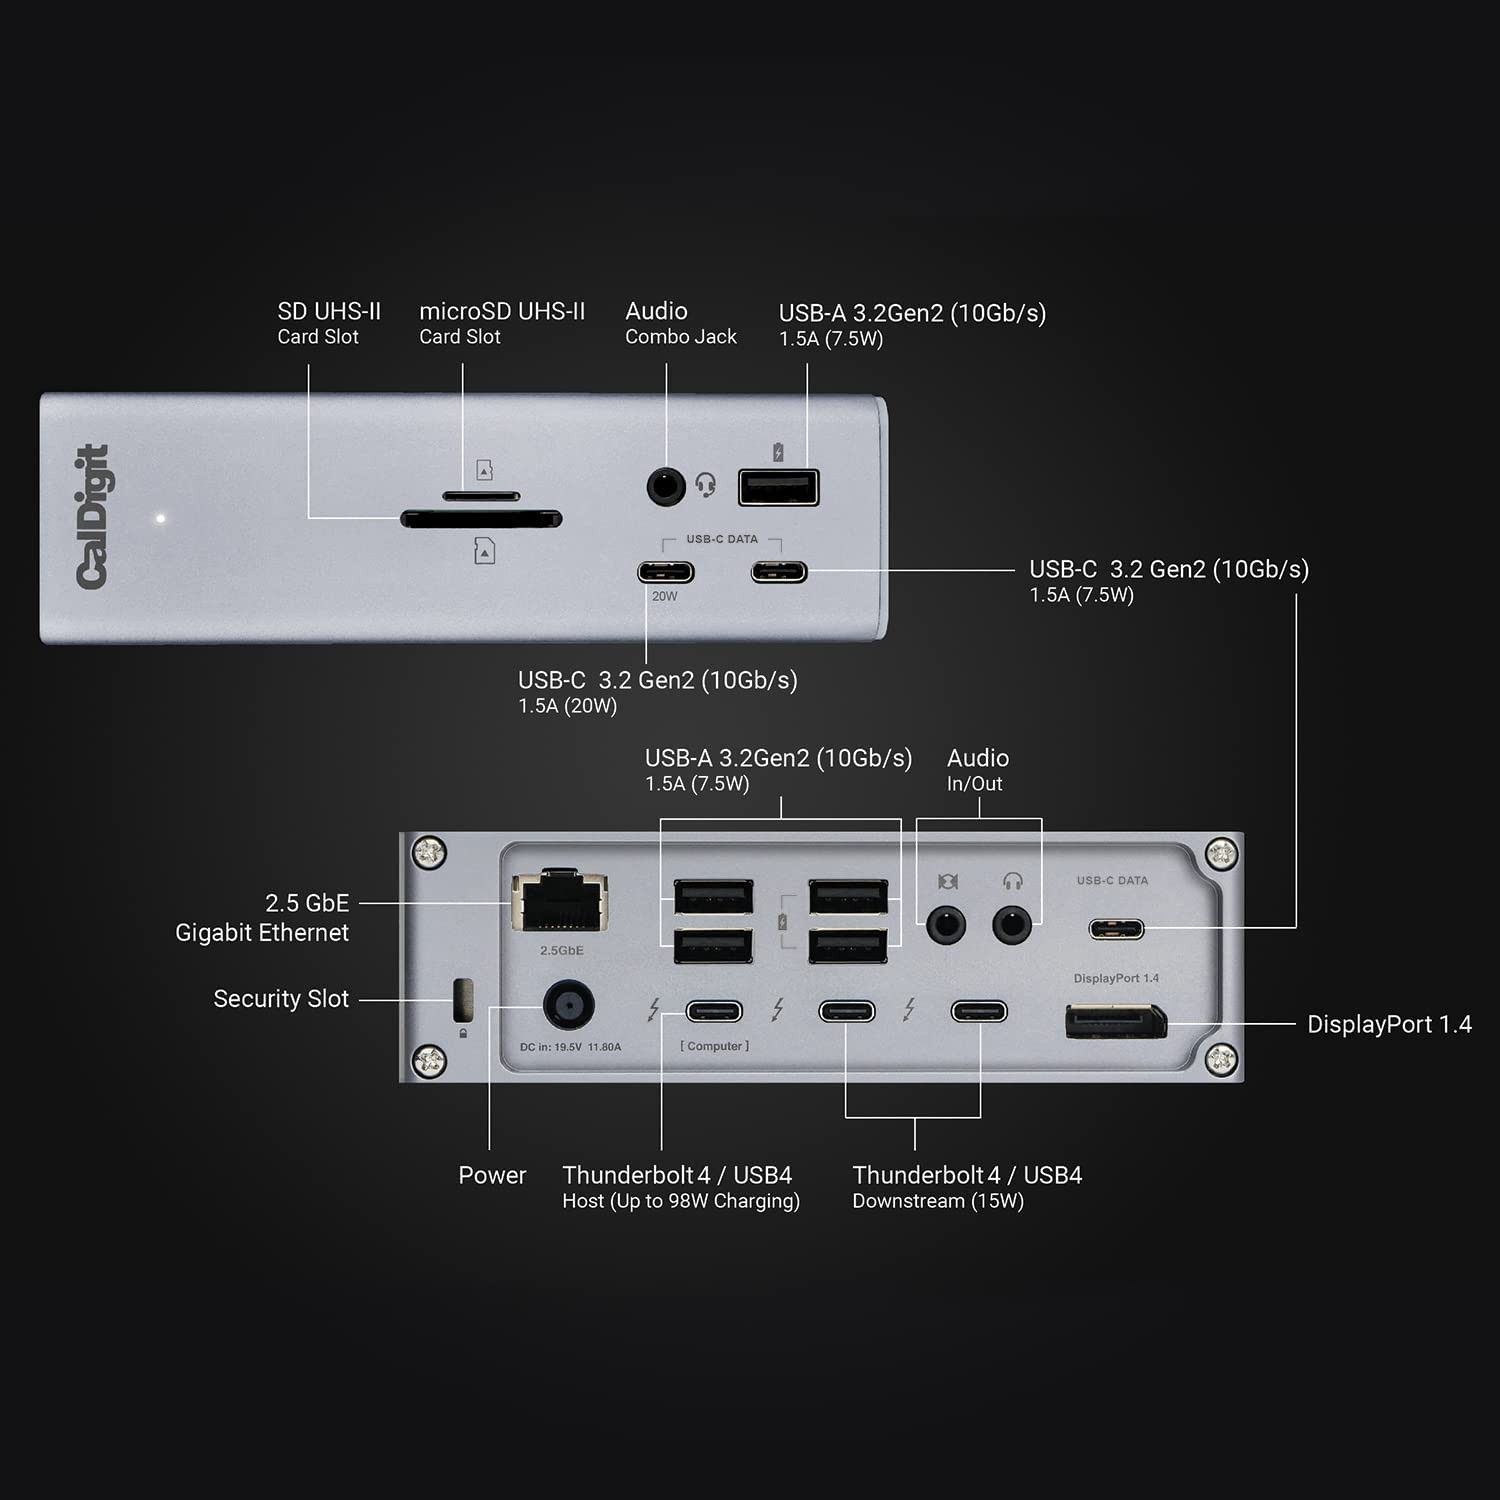 The ports and connectivity options of the CalDigit TS4 Thunderbolt 4 Dock.